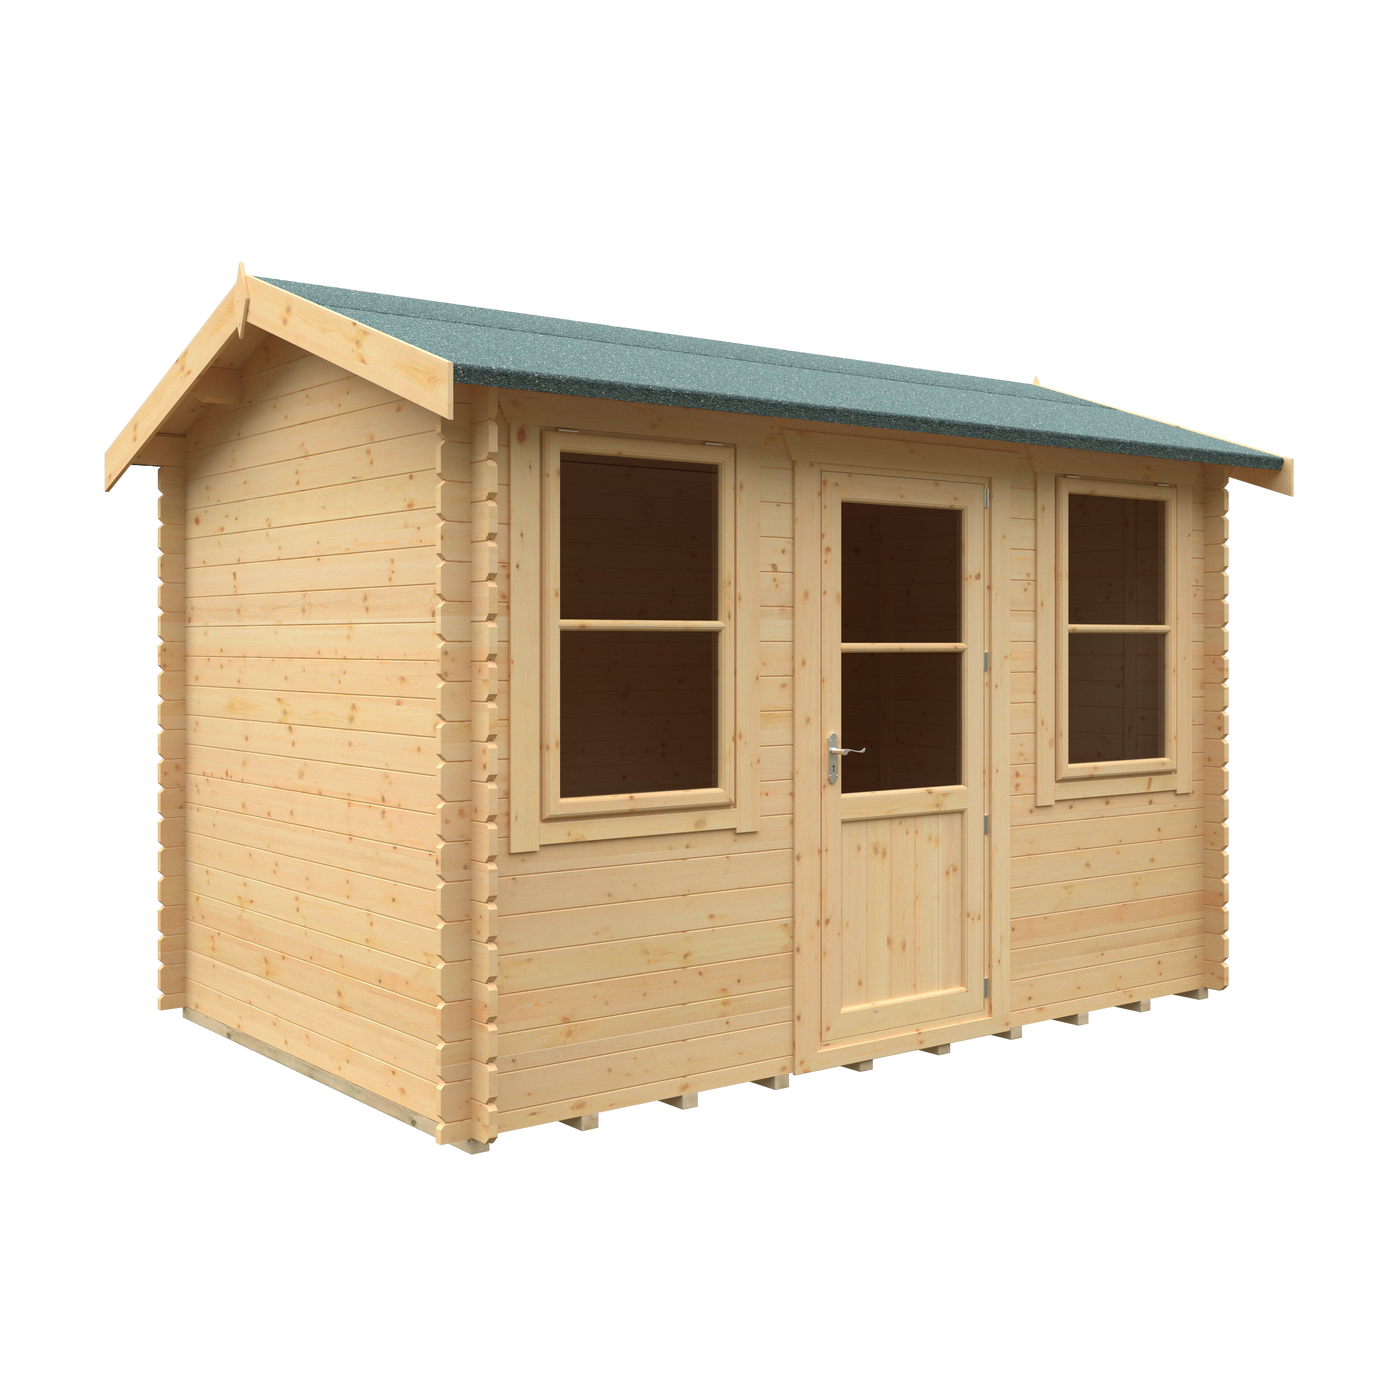 Purewell Timber Buildings  Sheds, Garden Rooms and Log Cabins